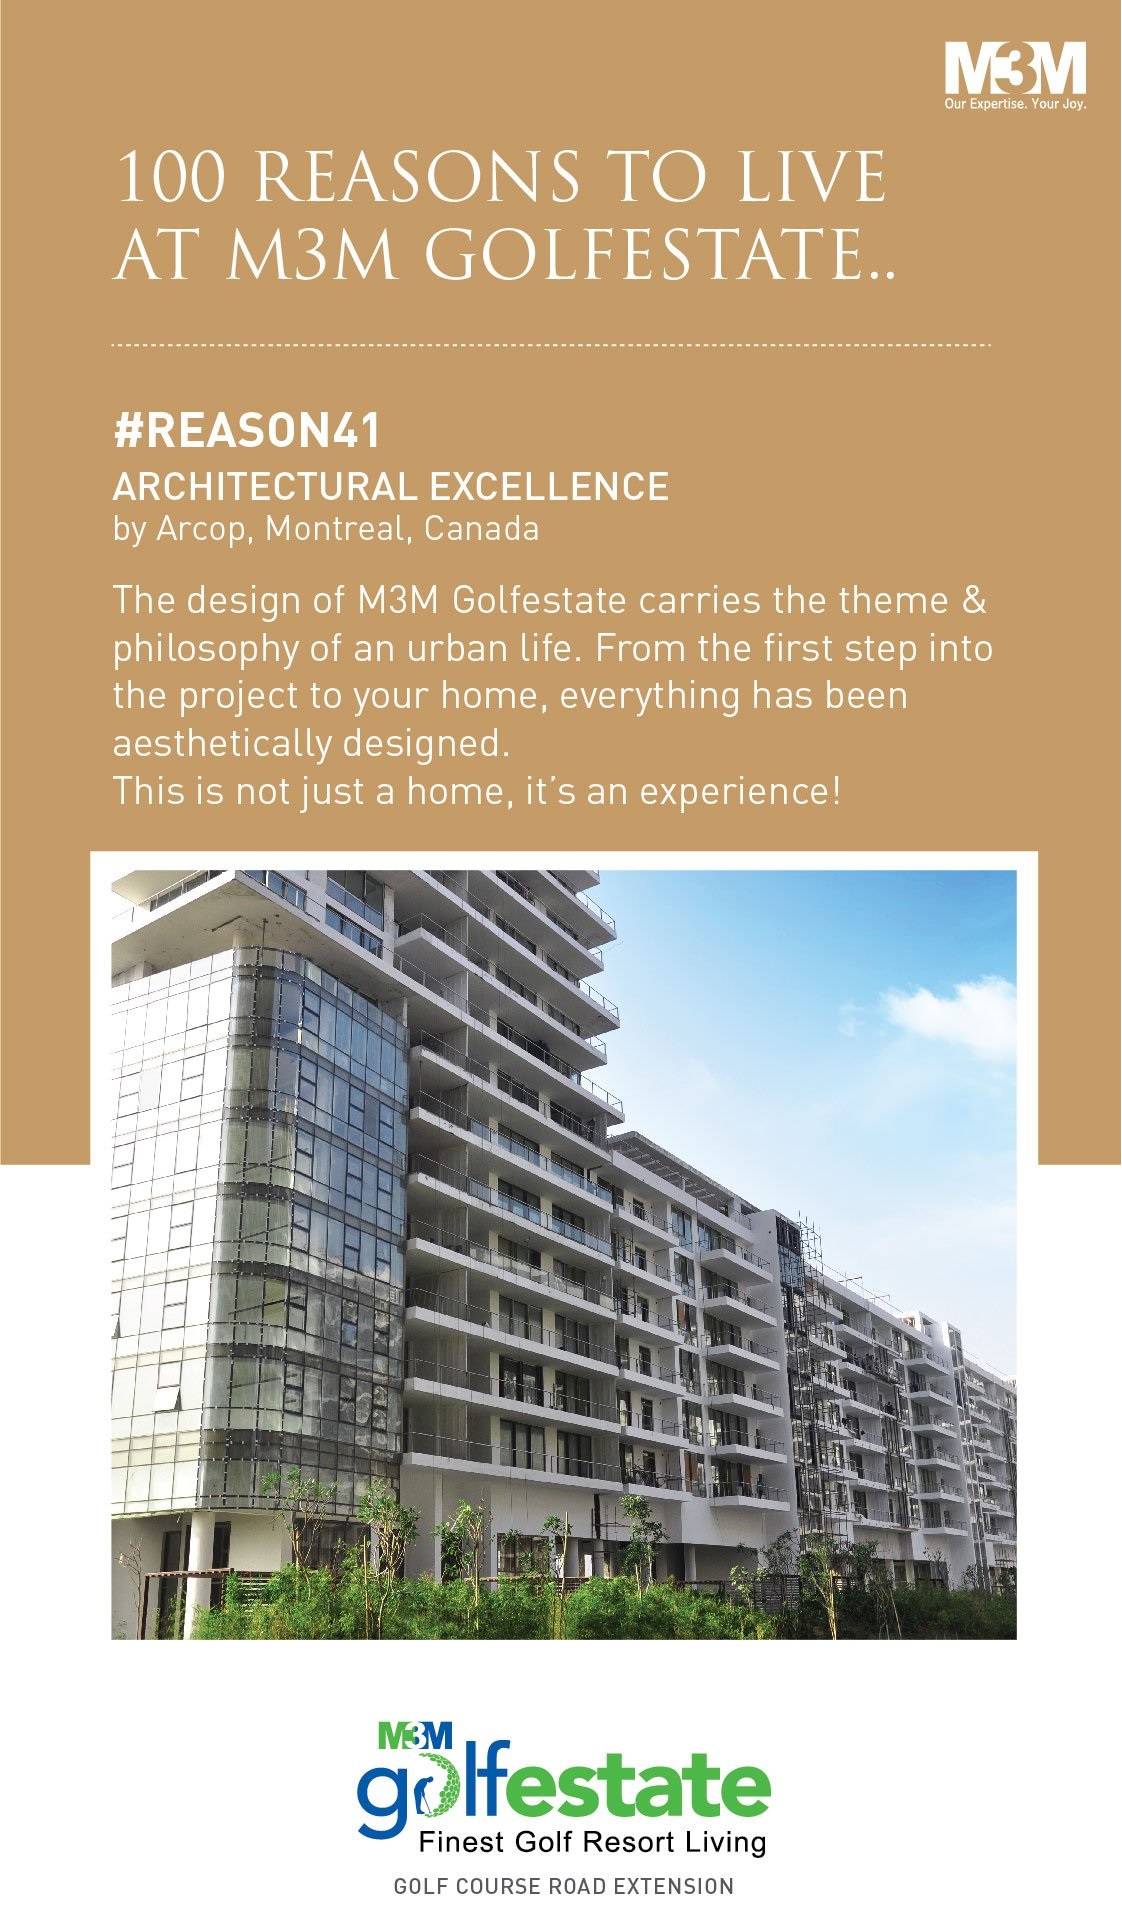 The design of M3M Golf Estate carries the theme and philosophy of an urban life. Update